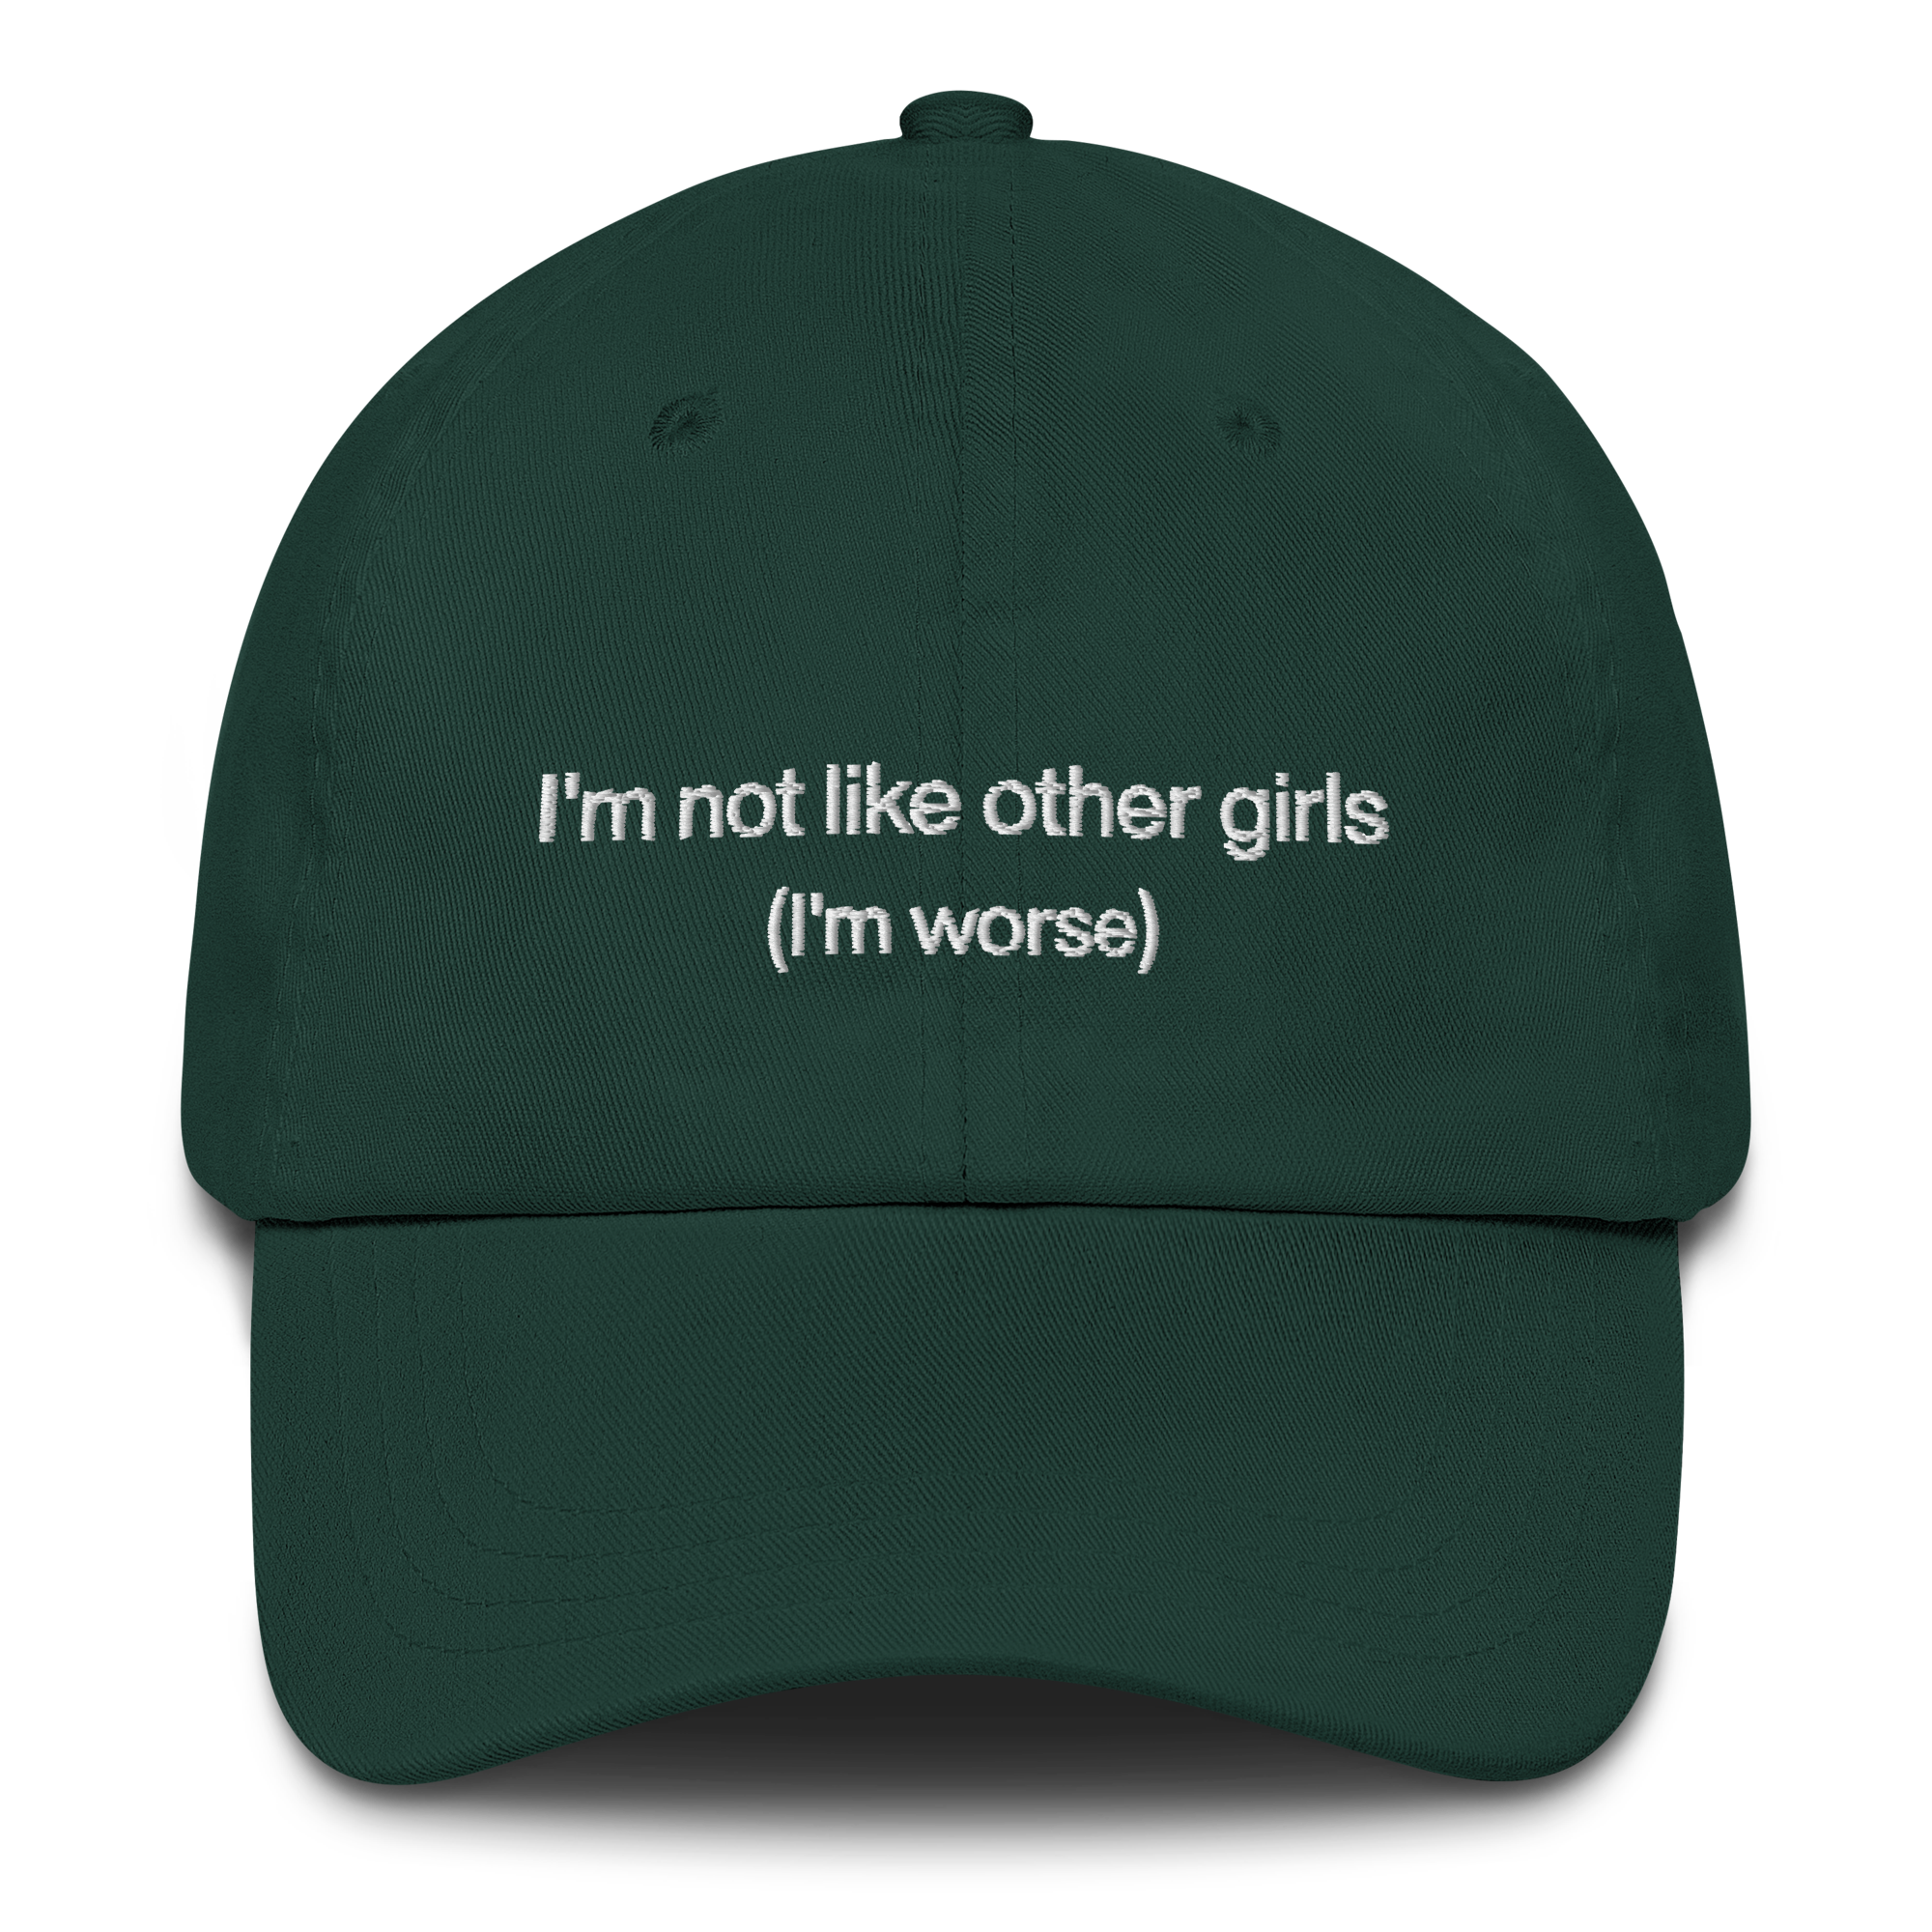 classic-dad-hat-spruce-front-667b1f1208814.png